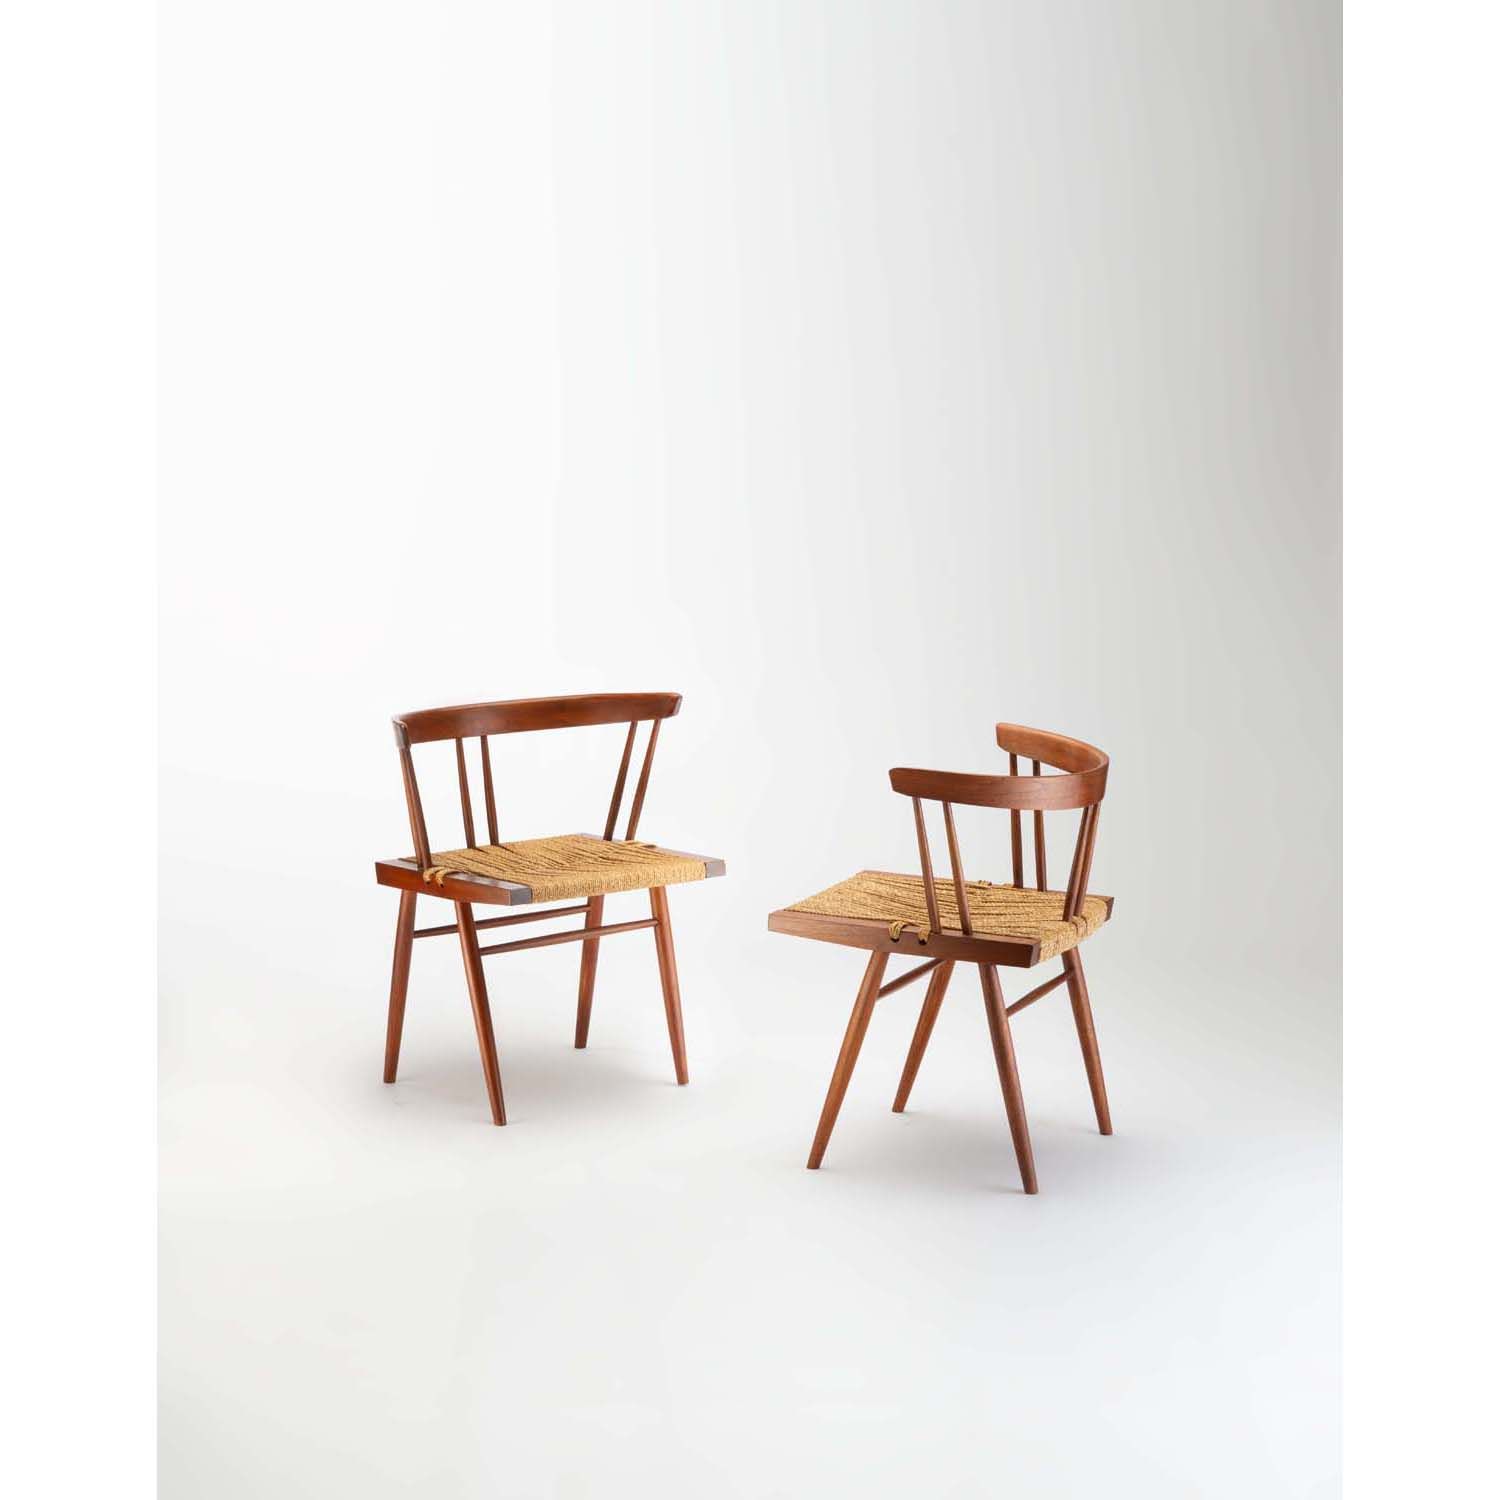 Null George Nakashima (1905-1990)
Paire de chaises dites 'Seagrass'
Noyer et her&hellip;